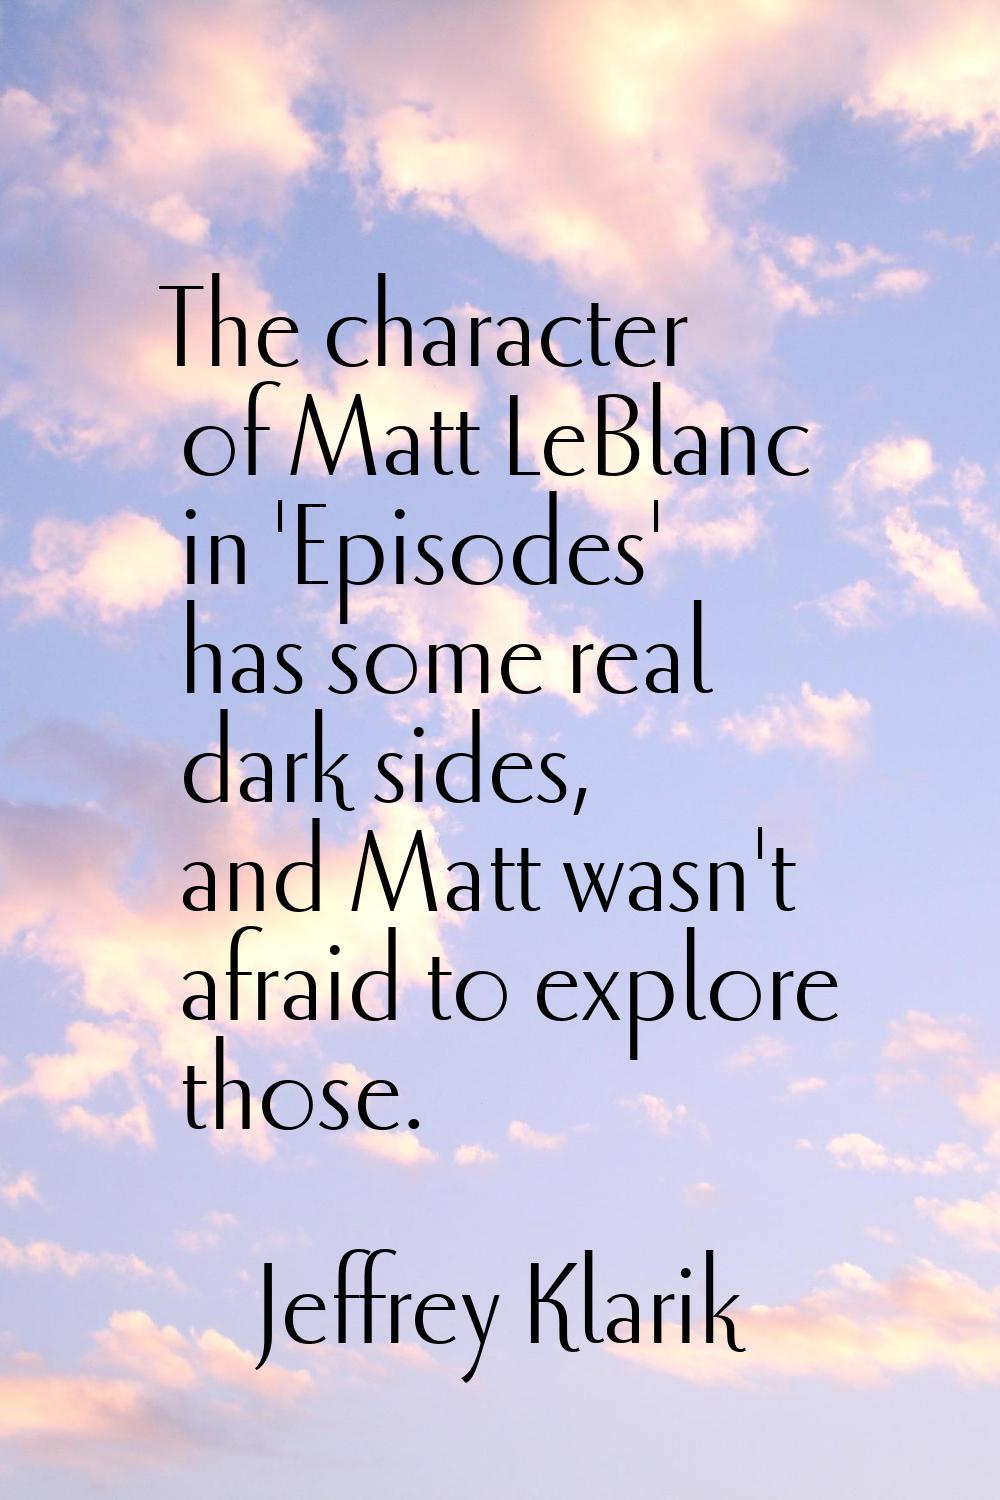 The character of Matt LeBlanc in 'Episodes' has some real dark sides, and Matt wasn't afraid to exp